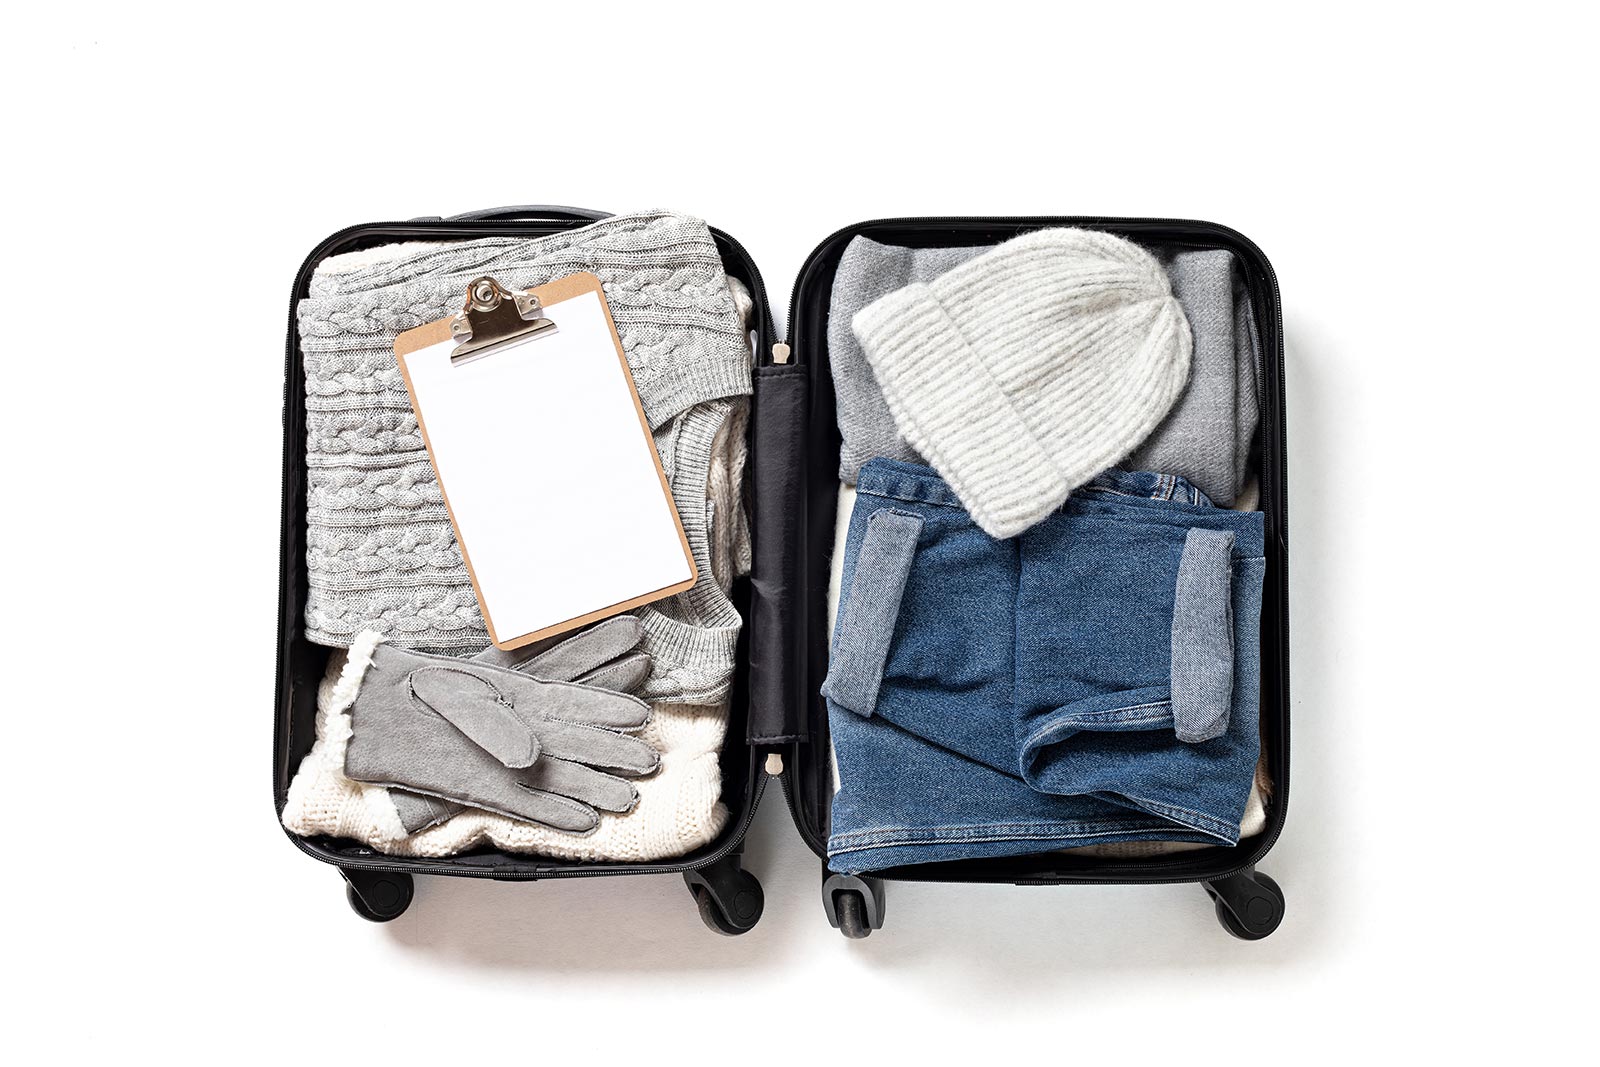 Packed suitcase for cold weather. Complete packing guide for the Faroe Islands